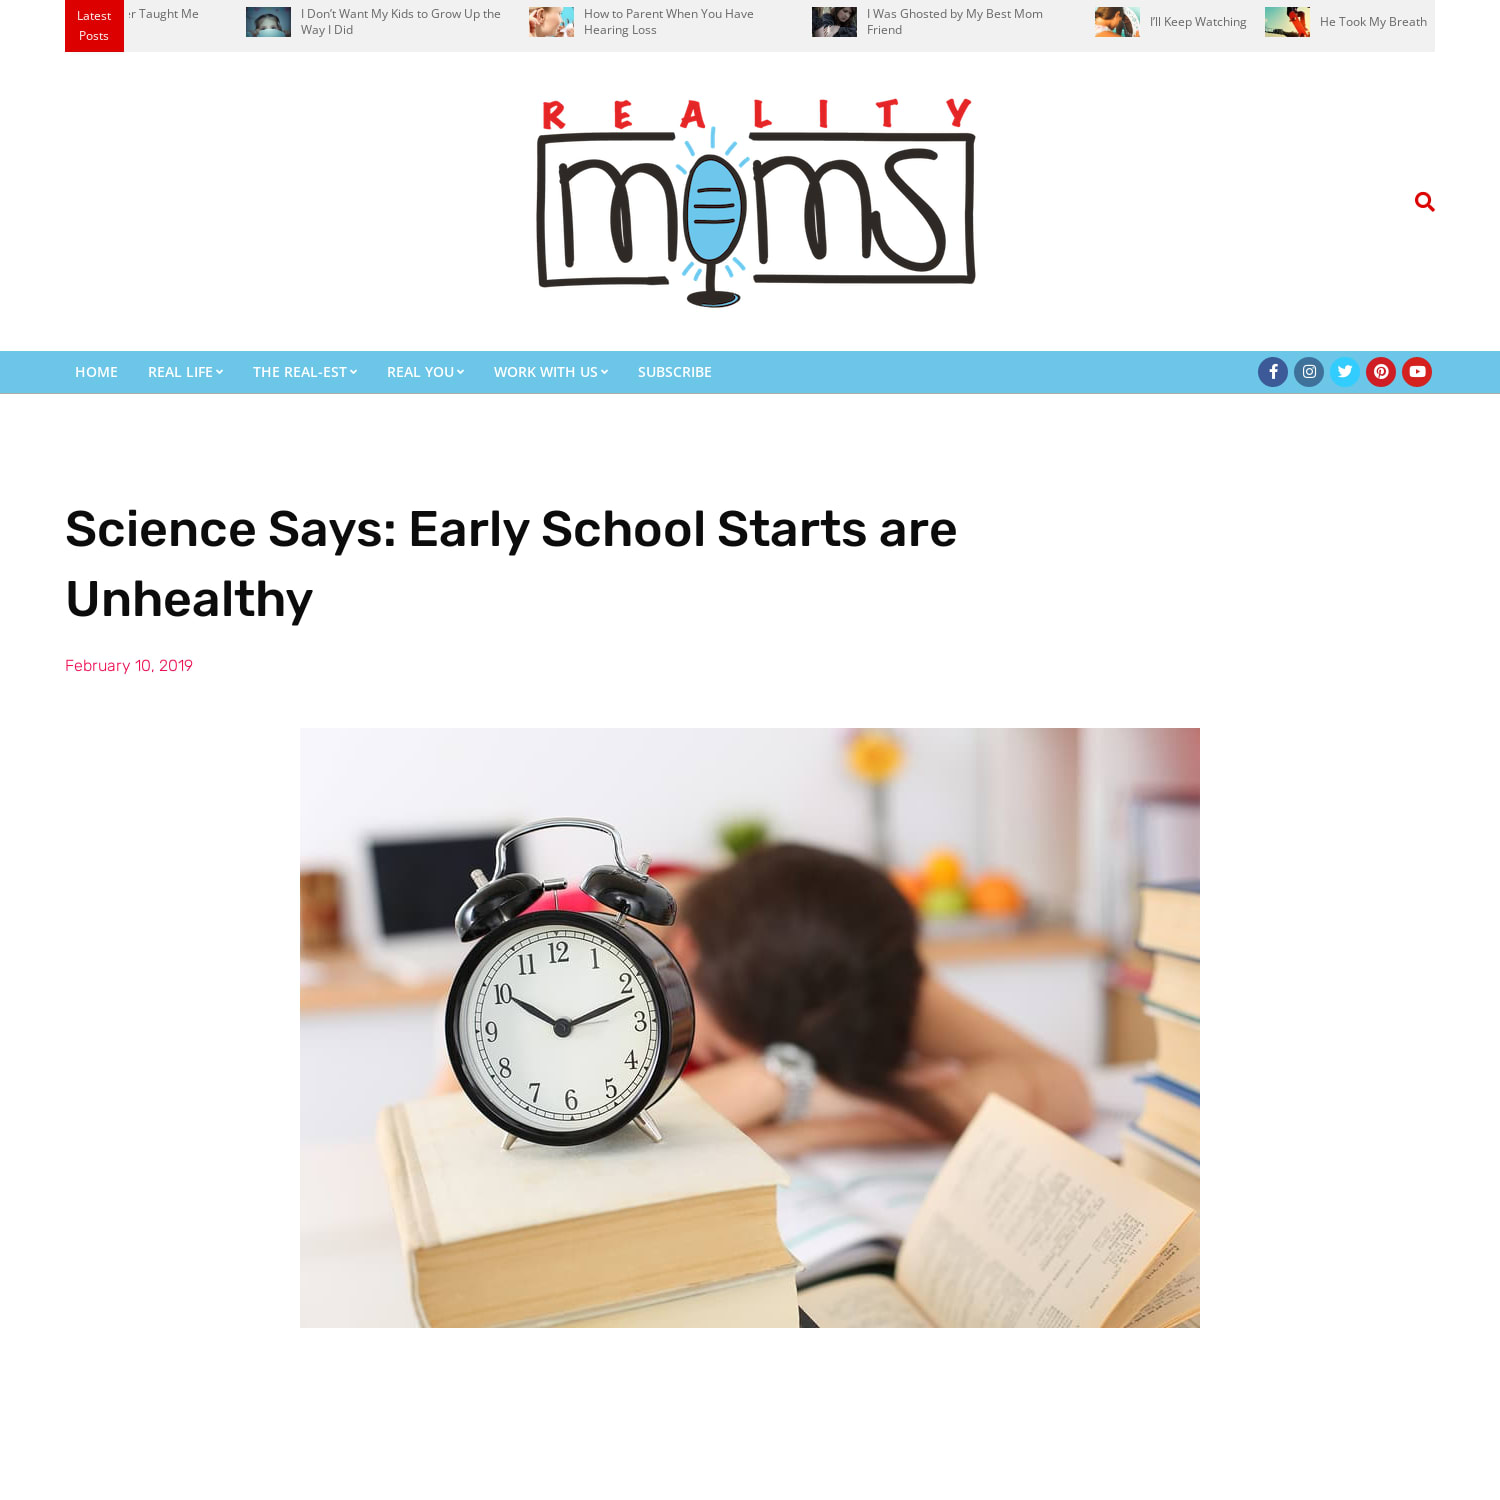 Science Says: Early School Starts are Unhealthy